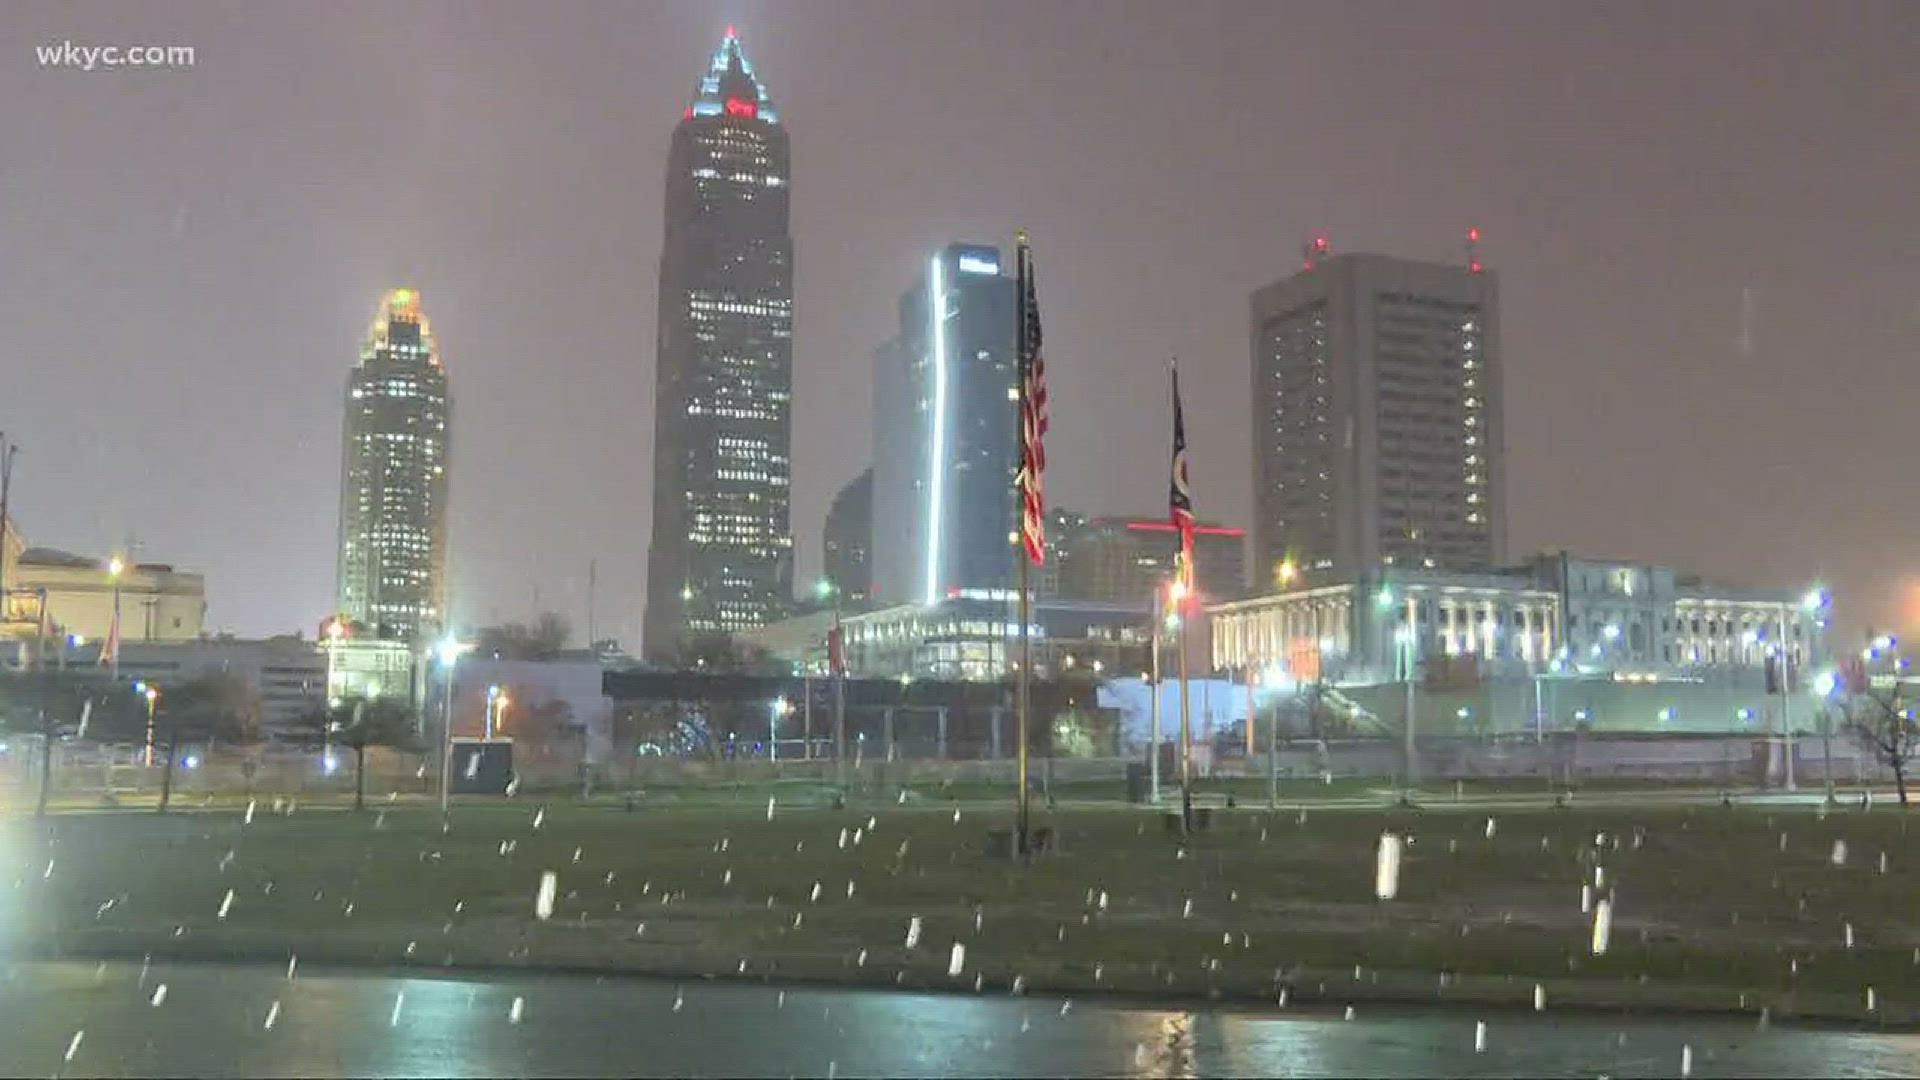 Here's the latest on the winter storm hitting Northeast Ohio as of 6 a.m.